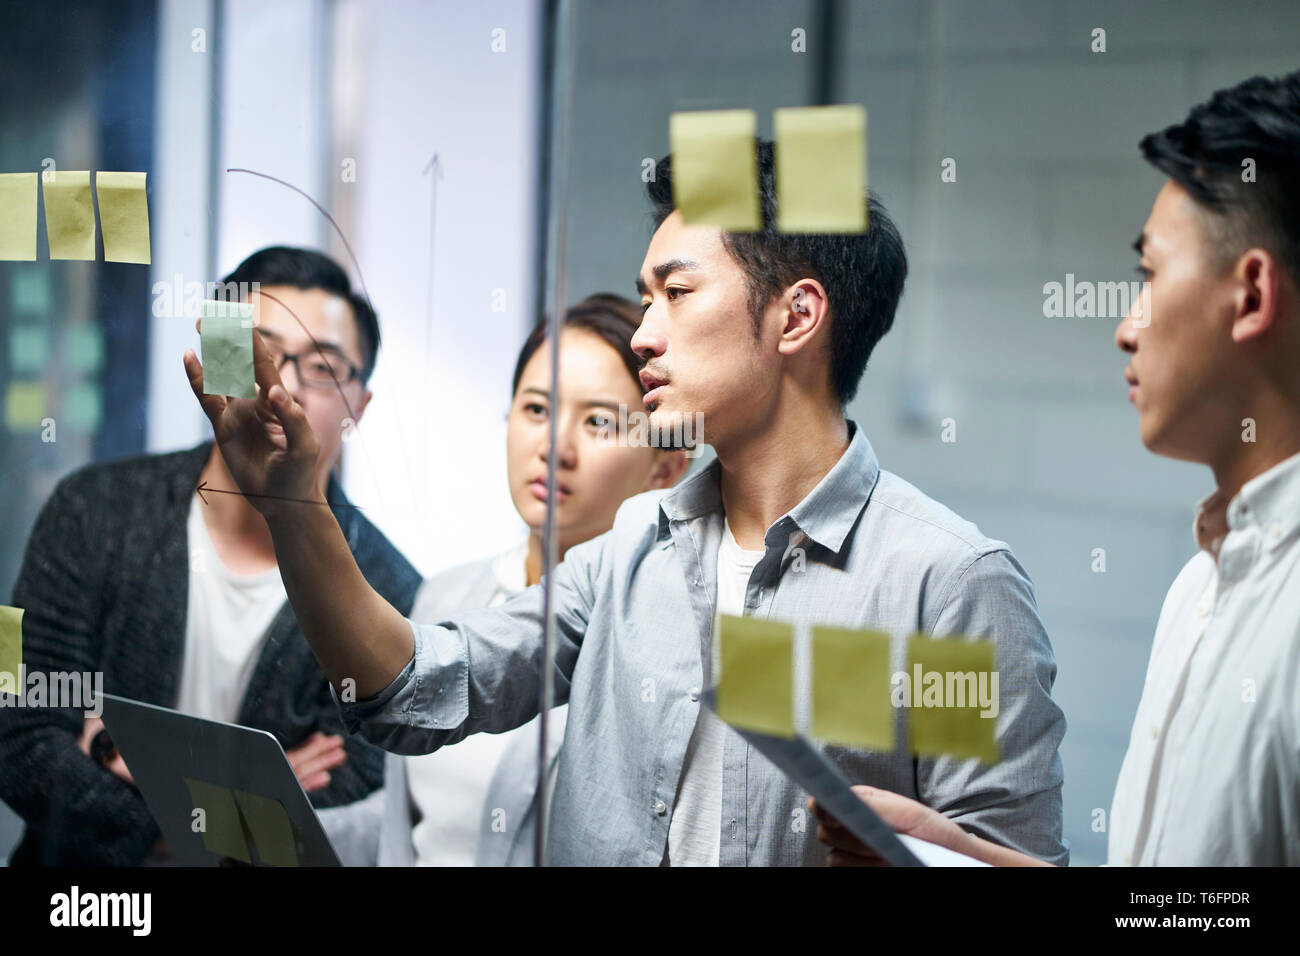 young asian entrepreneur of small company putting a adhesive note on glass in office during team meeting formulating business strategies. Stock Photo